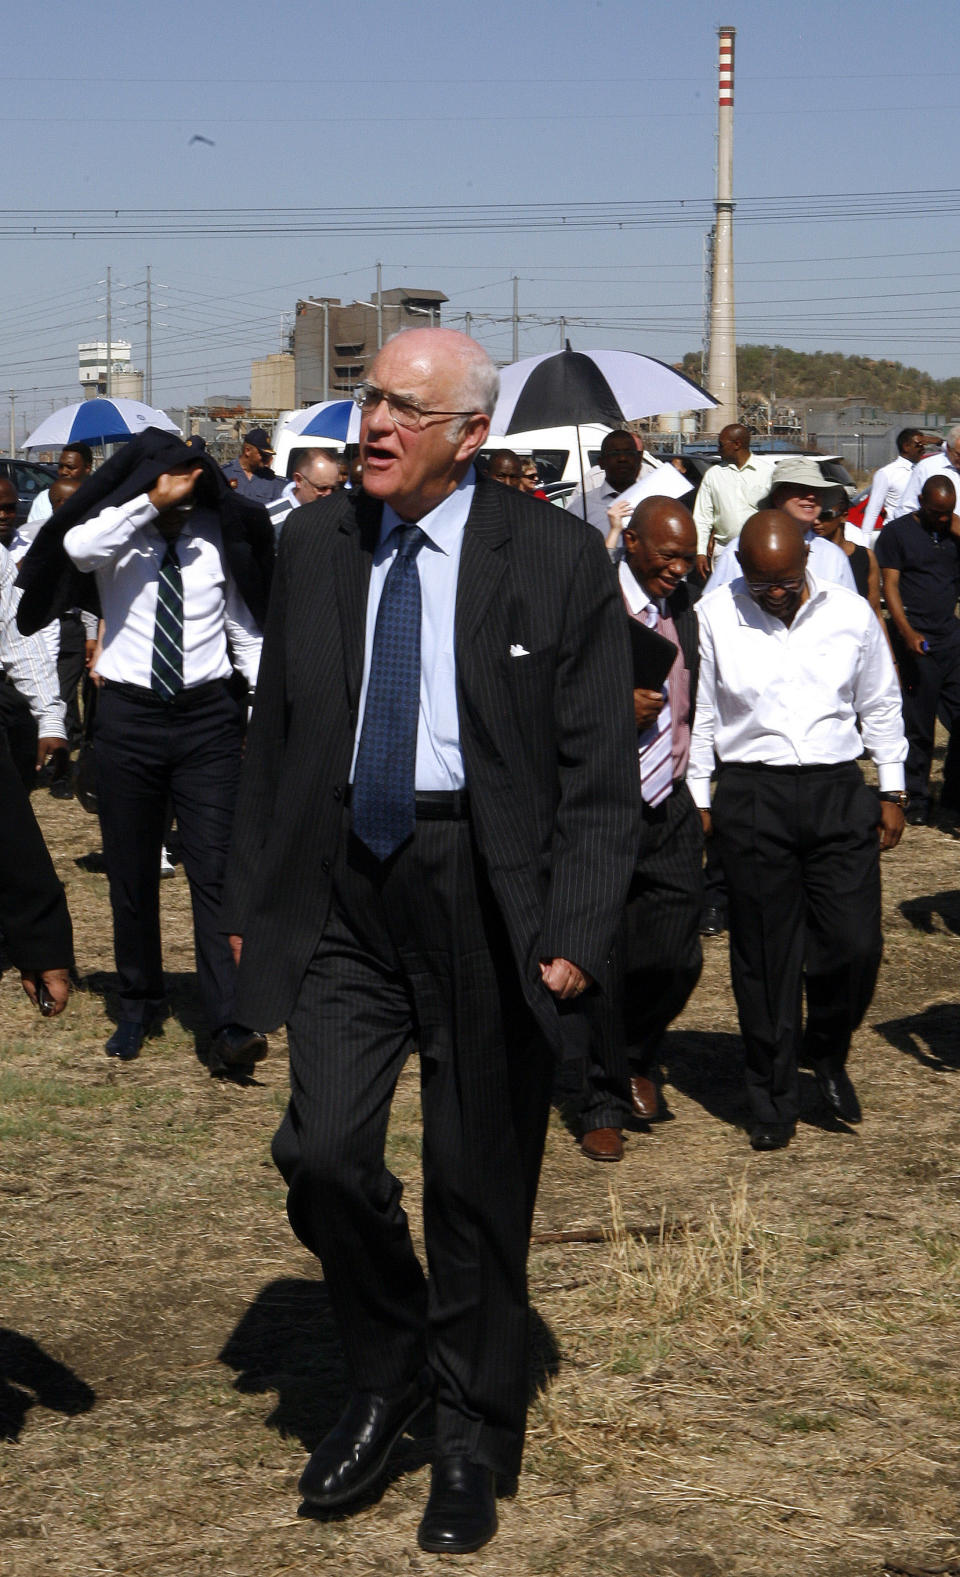 Retired judge Ian Farlam and his team as they inspect the area where the bodies of mine workers were found after the shootings at Lonmin's platinum mine in Marikana near Rustenburg, South Africa, Monday, Oct. 1, 2012. An official inquiry into the killings of dozens of people near a South African platinum mine began Monday even as labor unrest continued with workers at other mines as well as truck drivers continuing protests over pay. (AP Photo/Themba Hadebe)